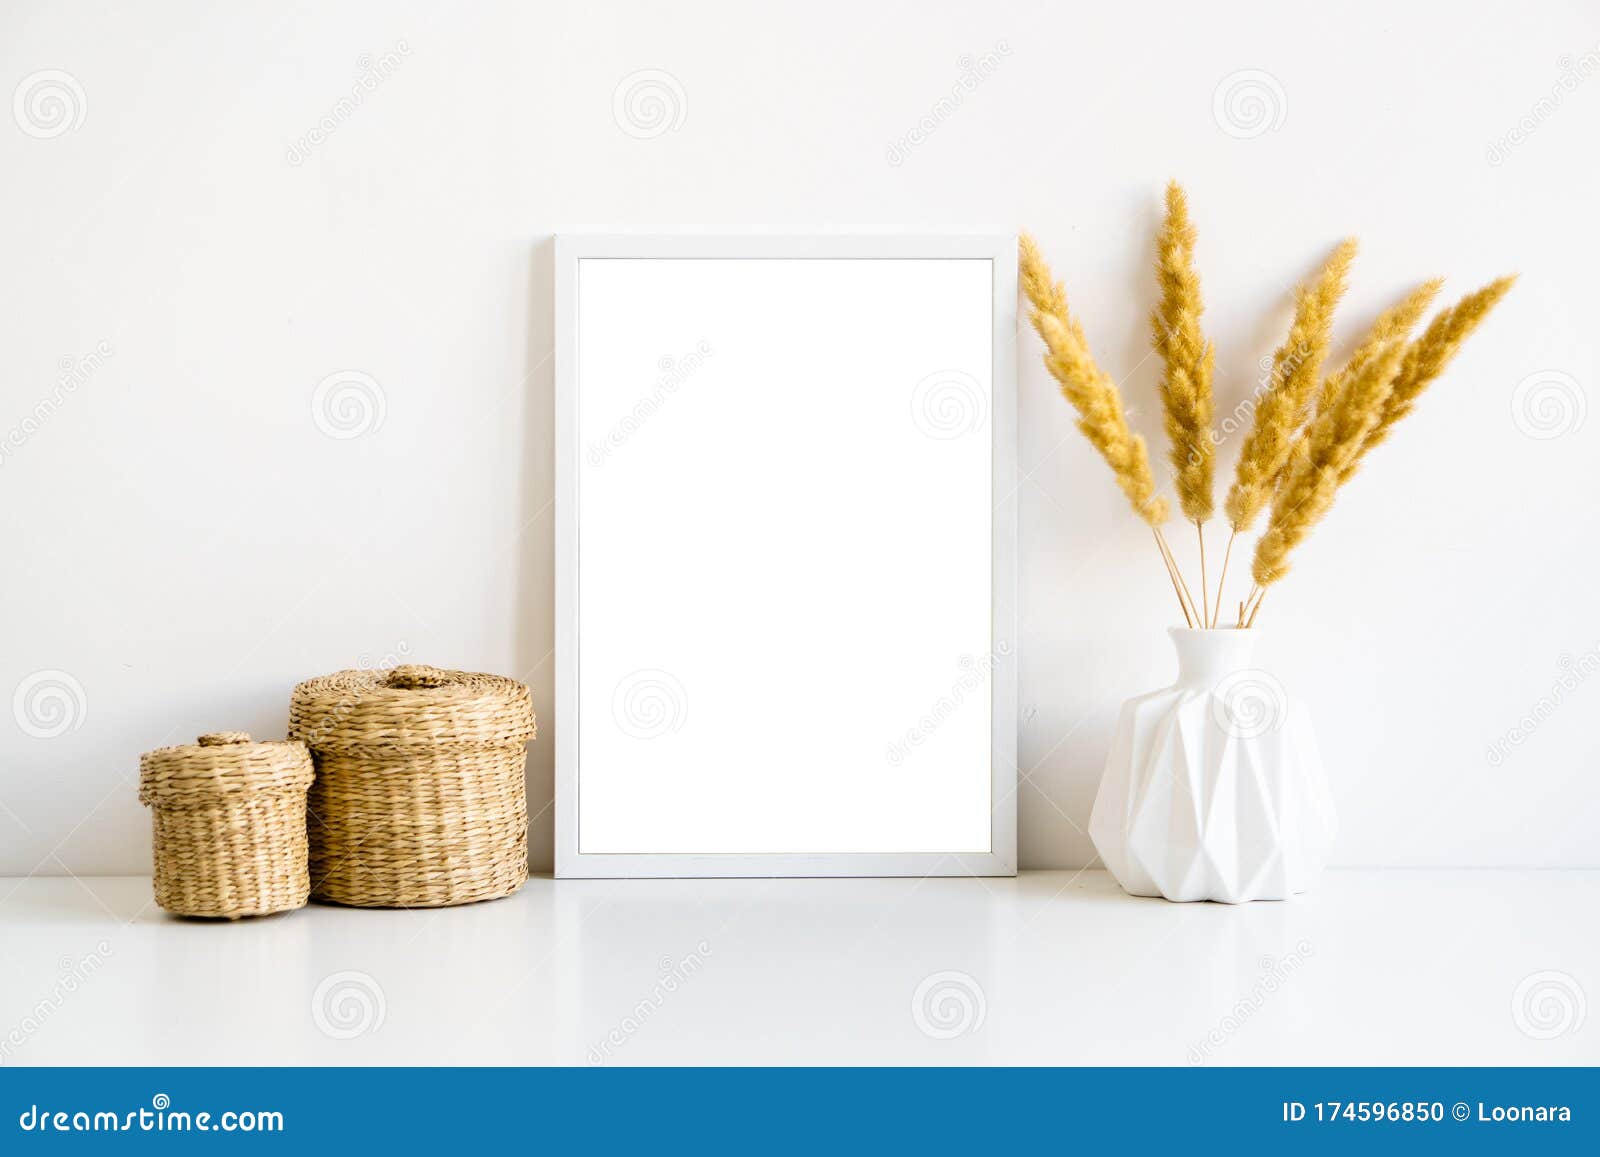 white frame and home decoration details on tabletop with wall, artwork poster mock-up